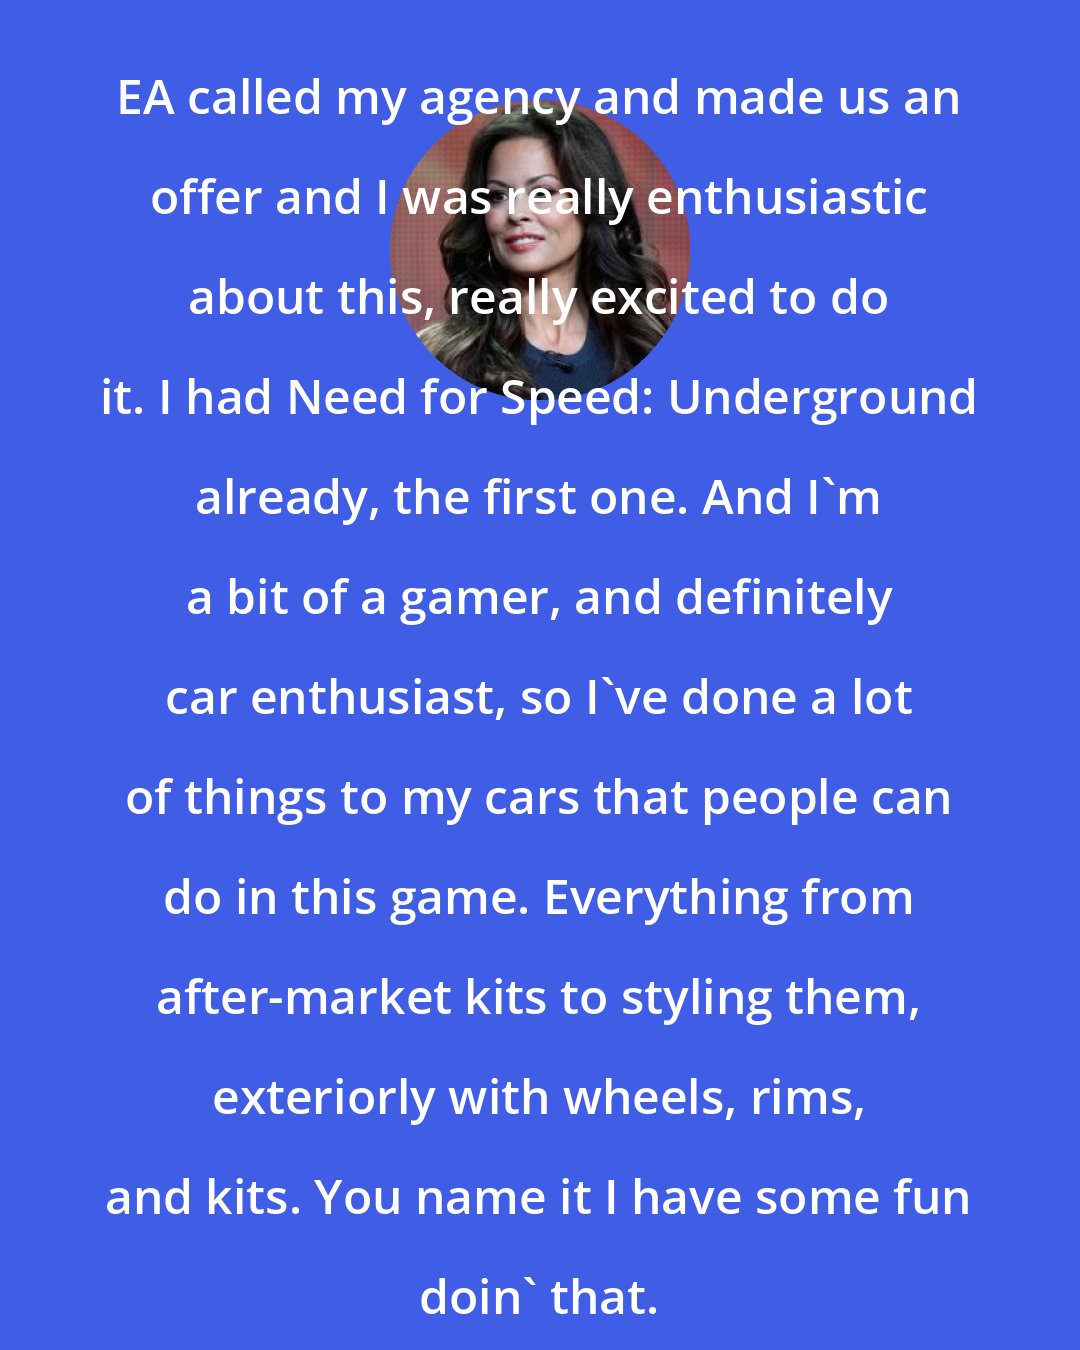 Brooke Burke: EA called my agency and made us an offer and I was really enthusiastic about this, really excited to do it. I had Need for Speed: Underground already, the first one. And I'm a bit of a gamer, and definitely car enthusiast, so I've done a lot of things to my cars that people can do in this game. Everything from after-market kits to styling them, exteriorly with wheels, rims, and kits. You name it I have some fun doin' that.